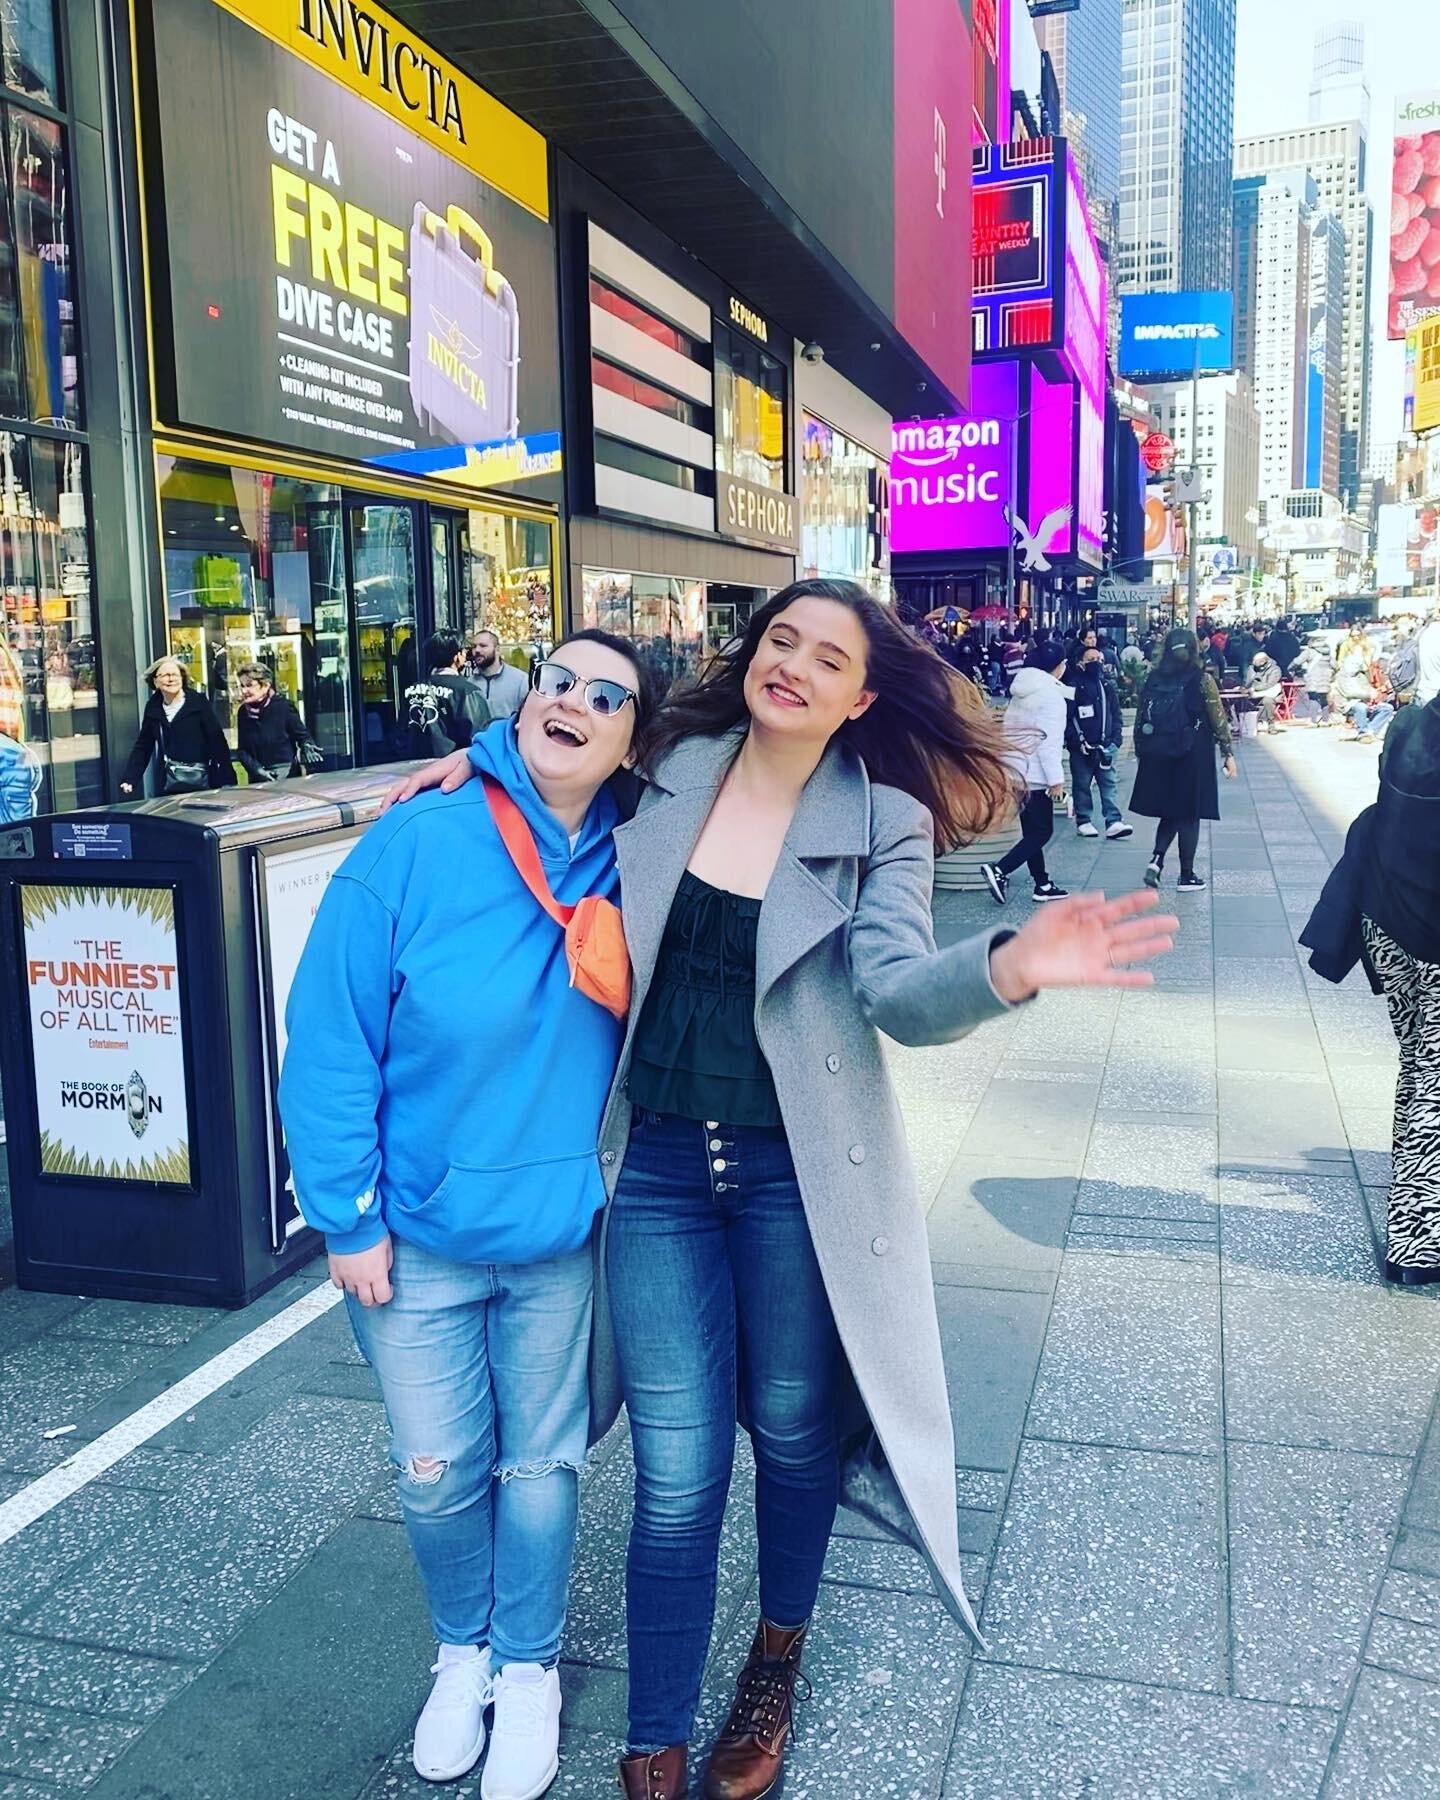 M&amp;M CR&Uuml; 5EVER 👯&zwj;♀️
.
.
.
let me take a minute to BRAG on this lady who just got her dream job on @goodmorningamerica &amp; is finally joining me in the big city 🌆 thanks for keeping our very unrealistic &amp; ambitious middle school ny